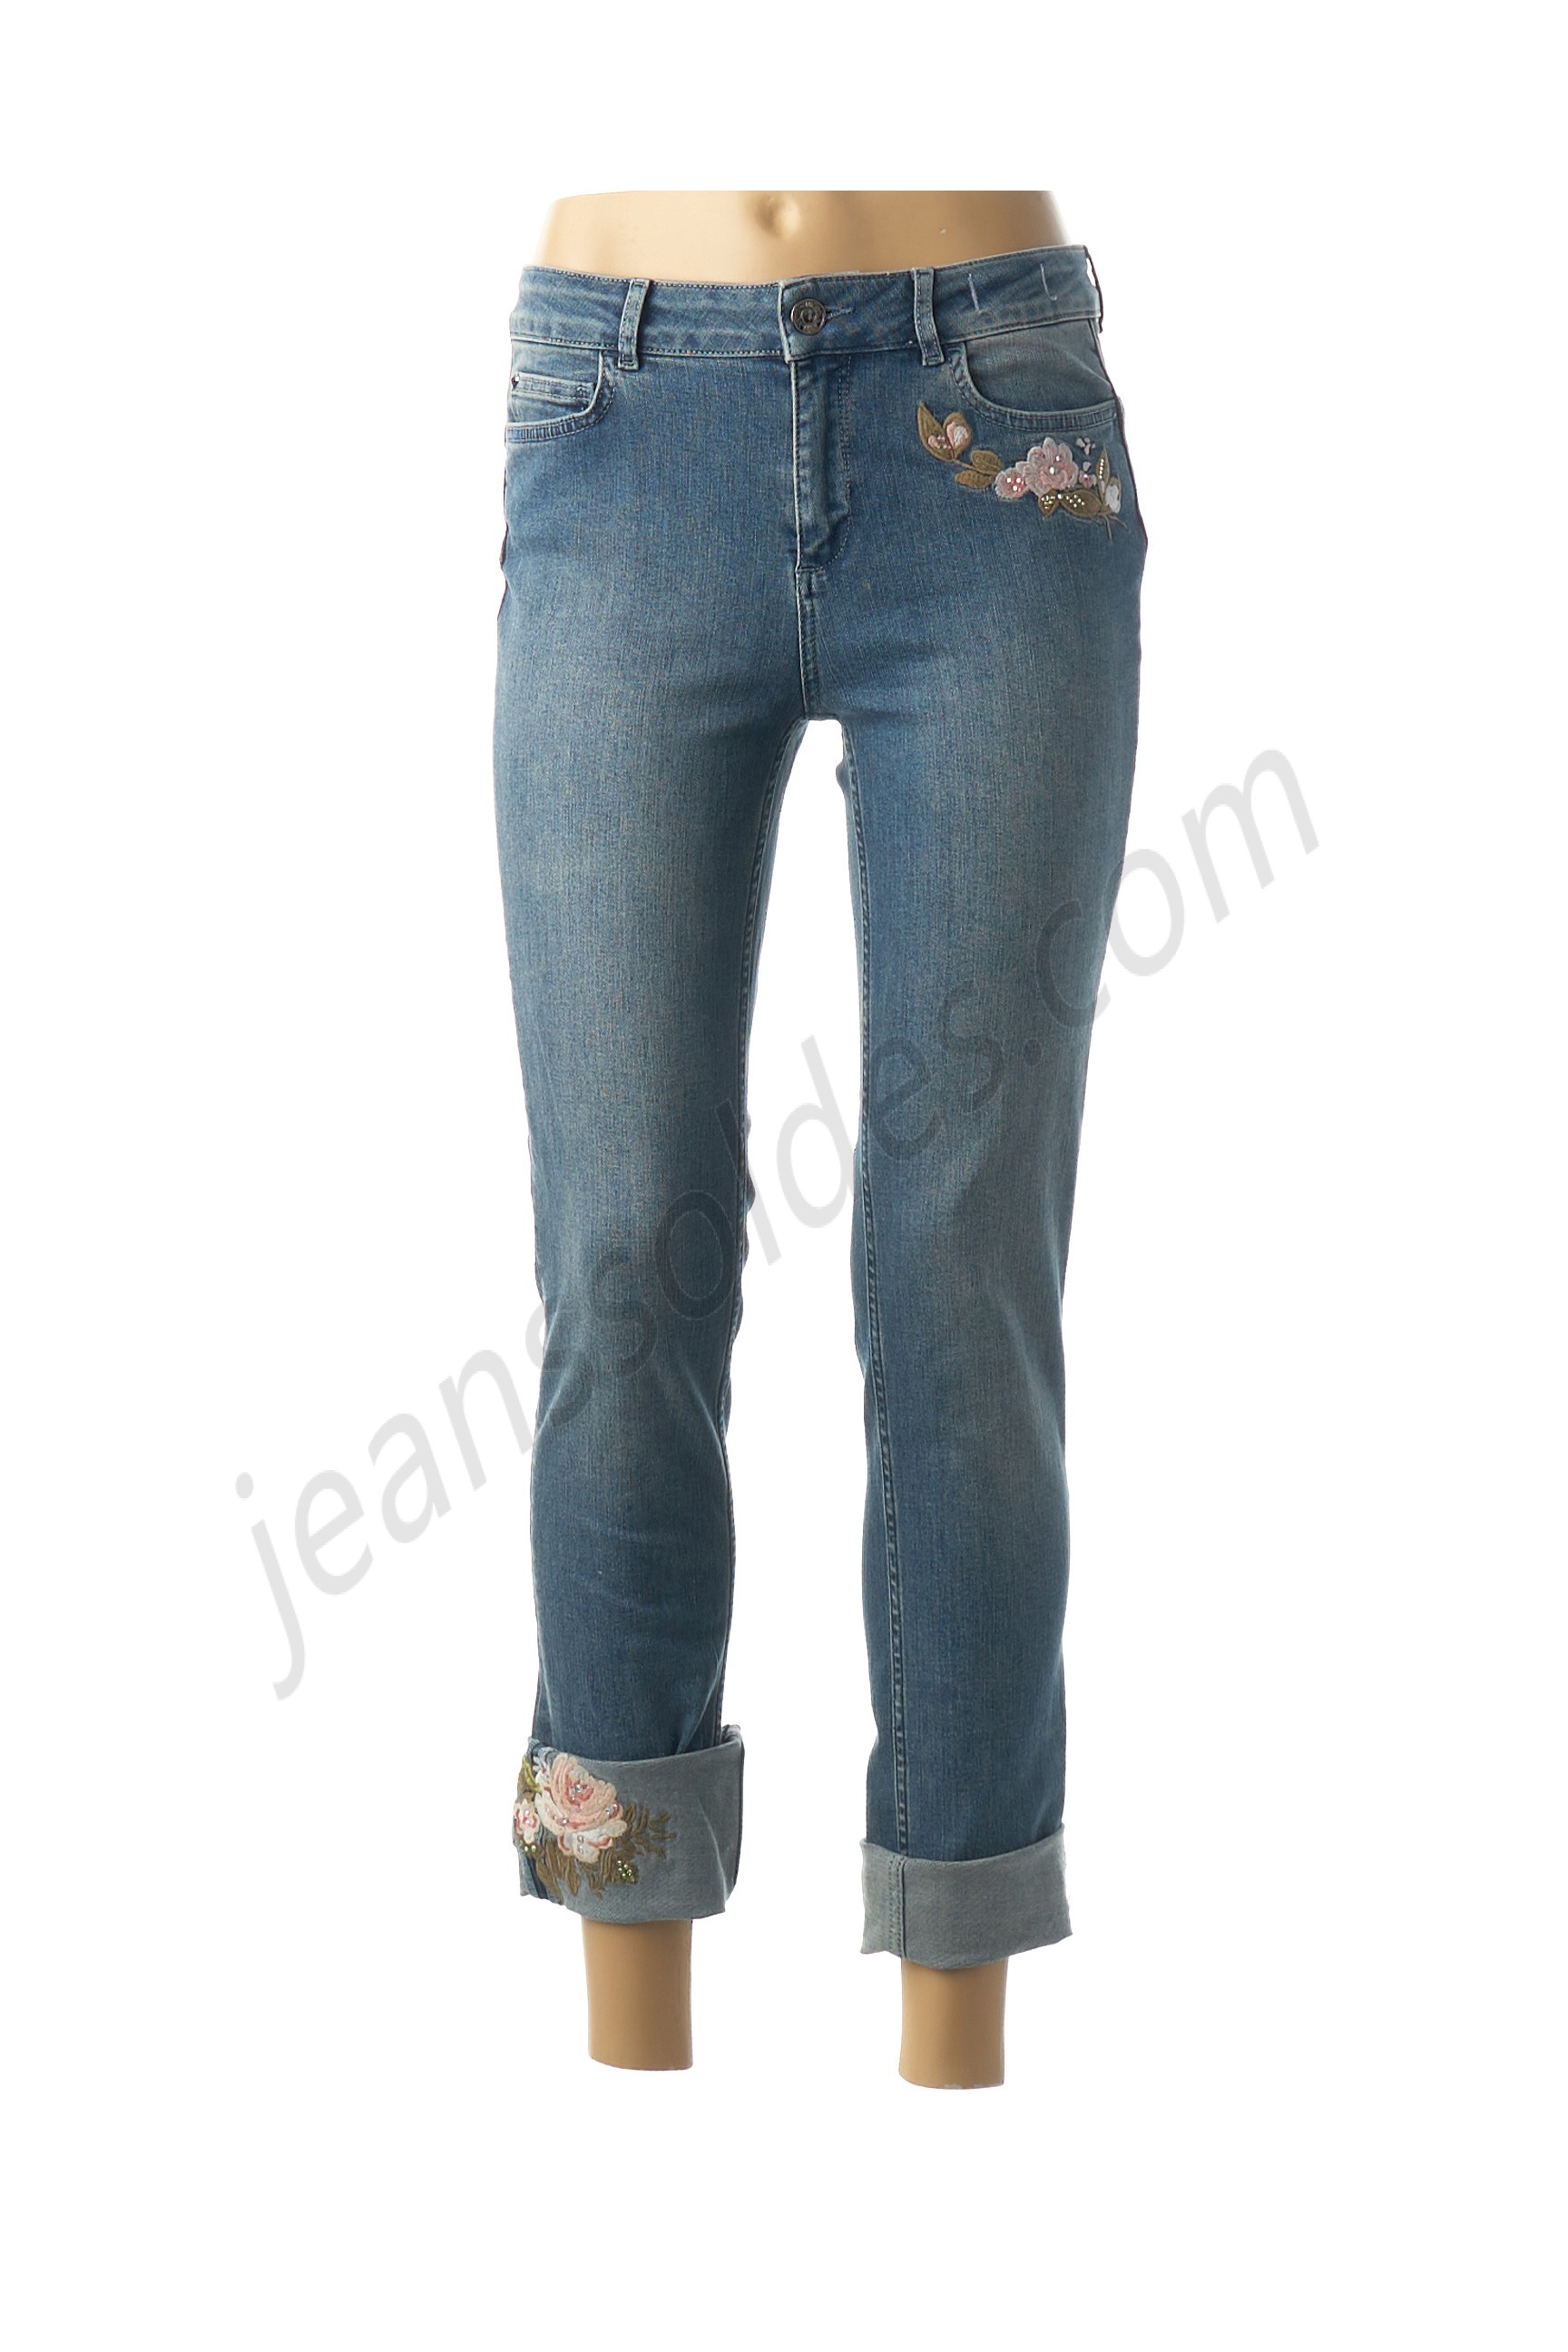 my twin-Jeans coupe slim prix d’amis - my twin-Jeans coupe slim prix d’amis